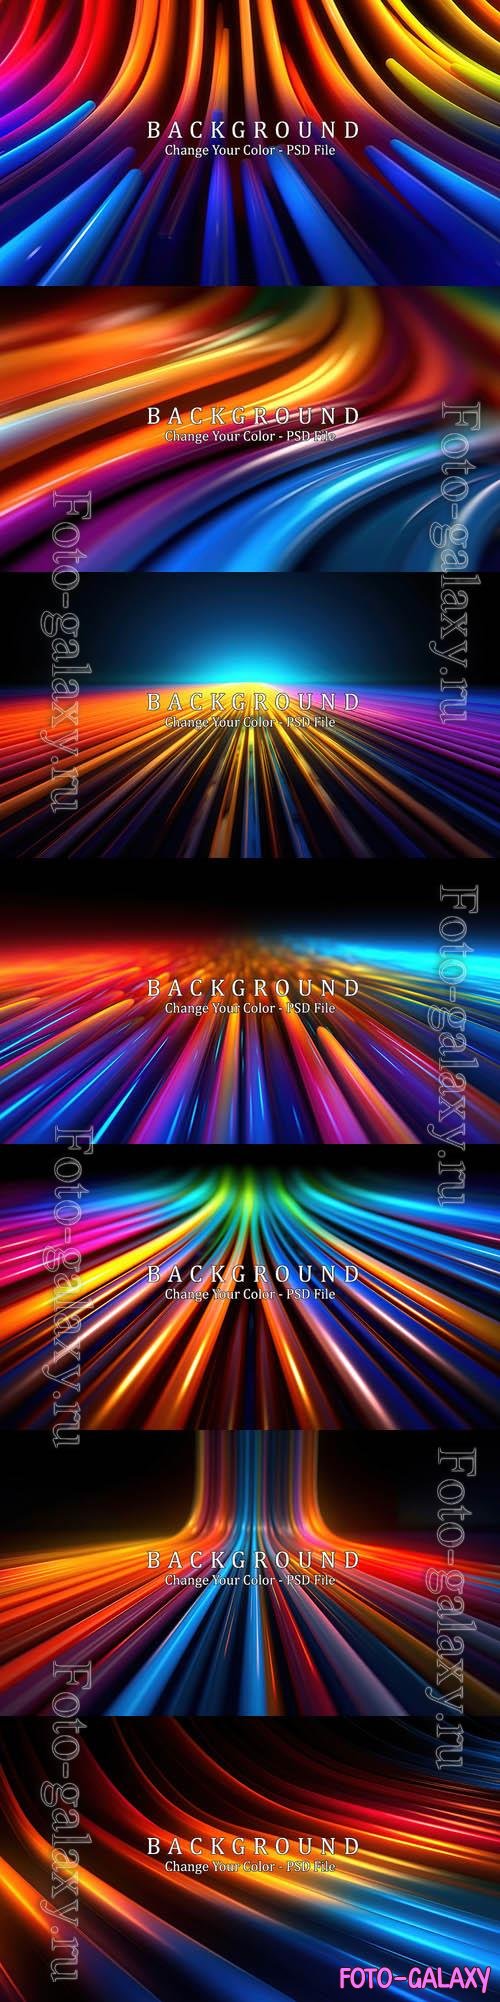 PSD abstract scene background product presentation